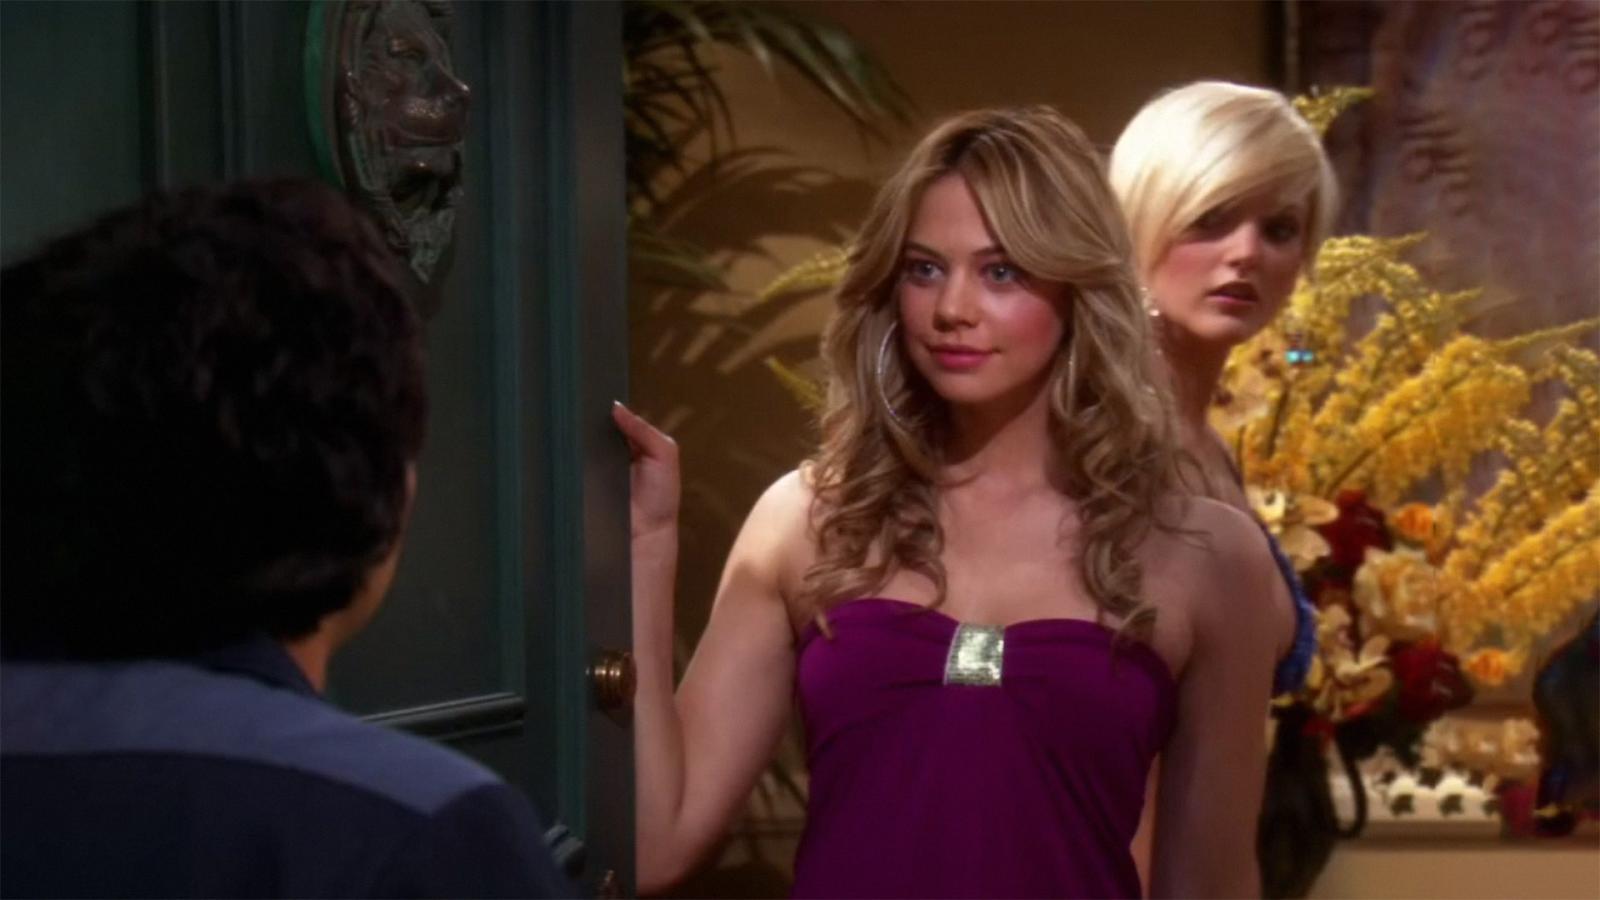 TBBT Guest Star Has Us Fooled Looking Unrecognizable in 2 Different Roles - image 1